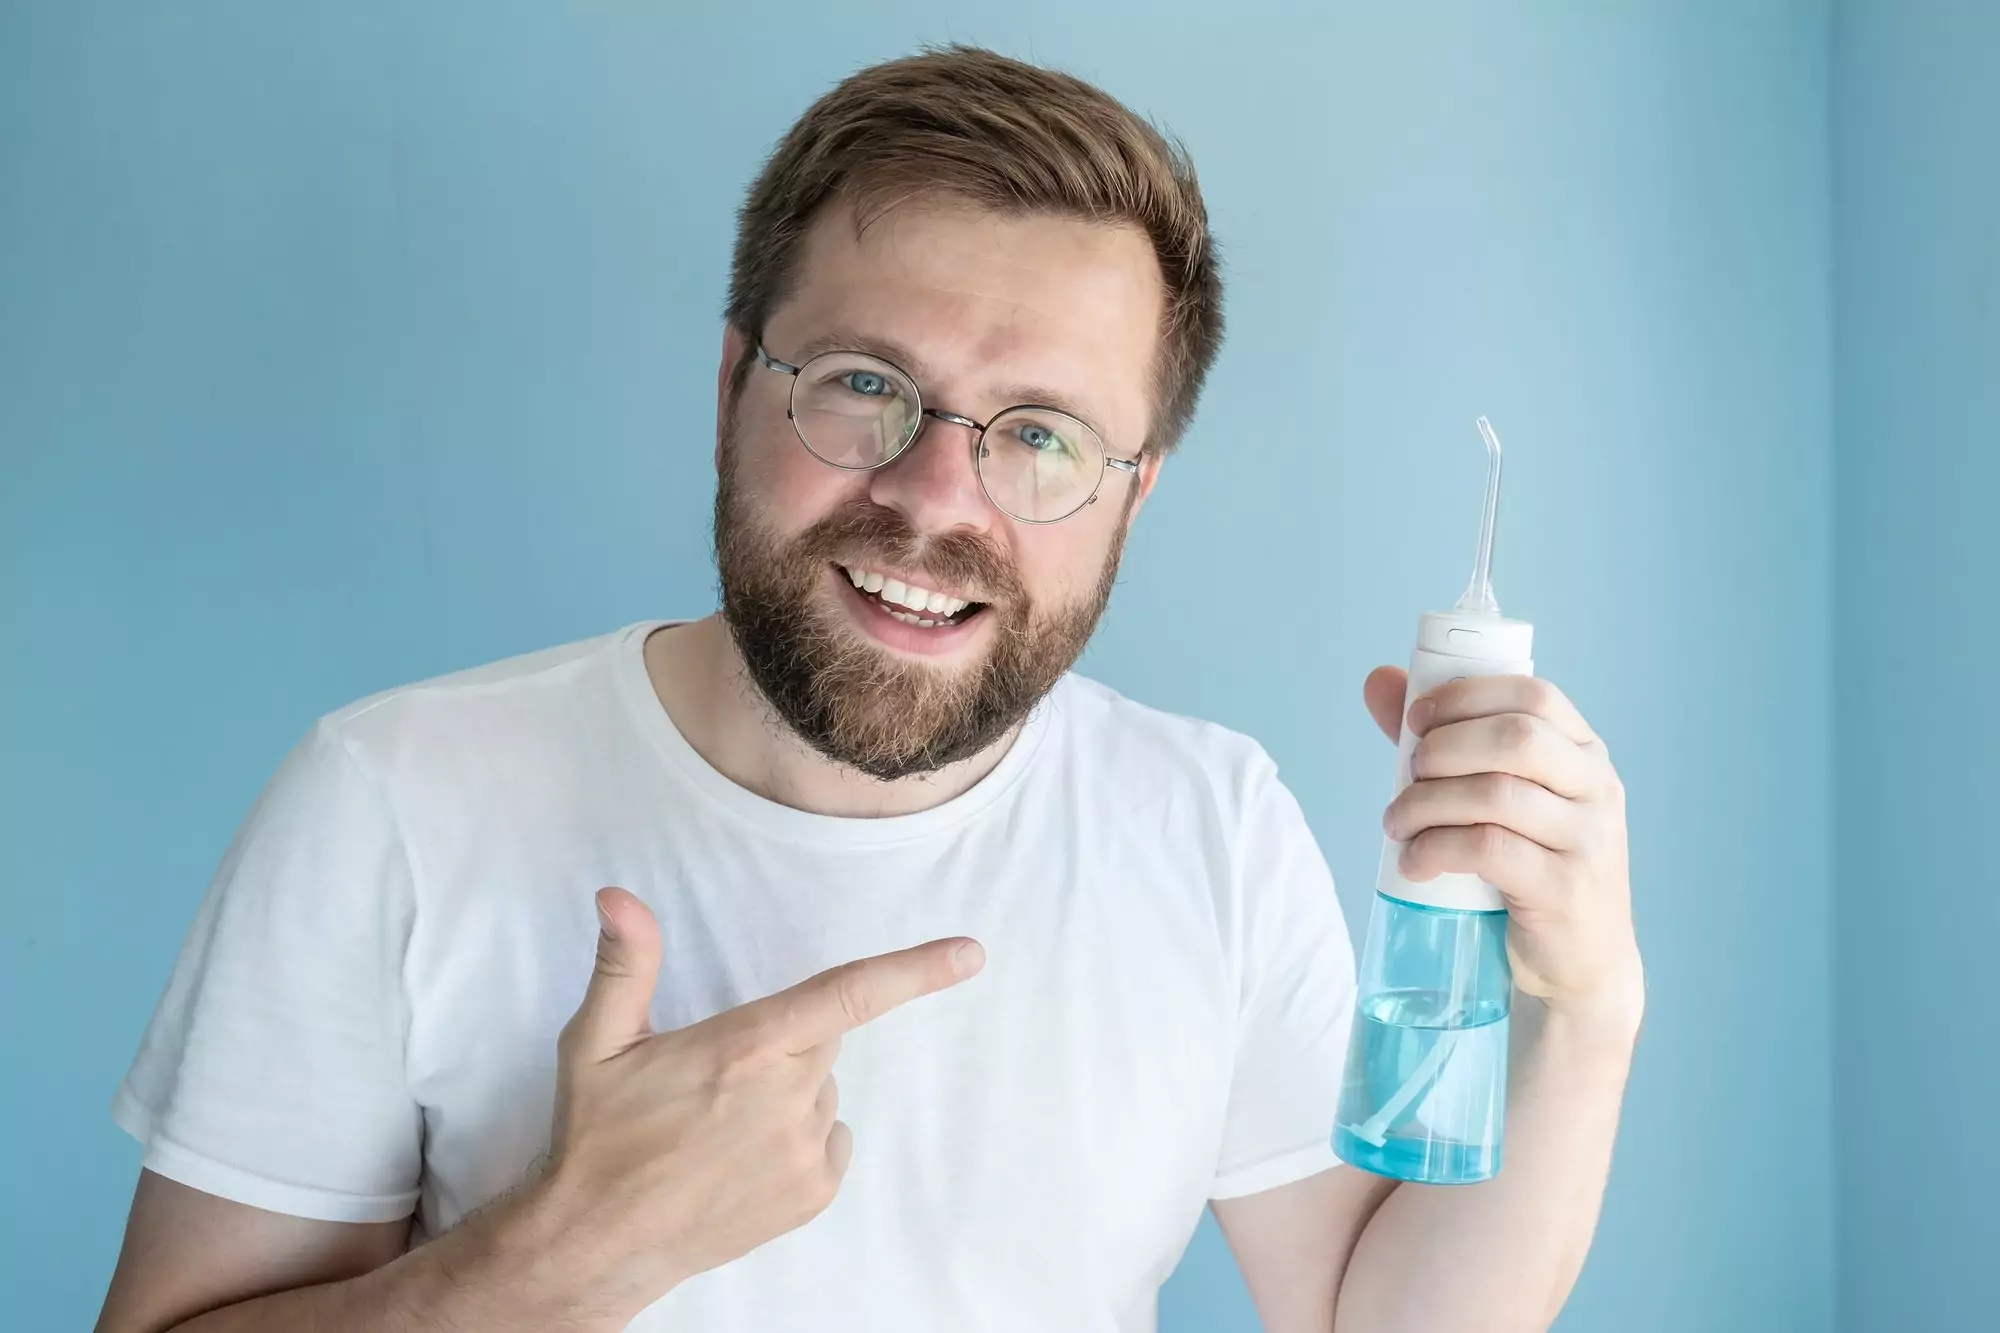 man holds portable irrigator, recommends this oral hygiene product and points to it with finger